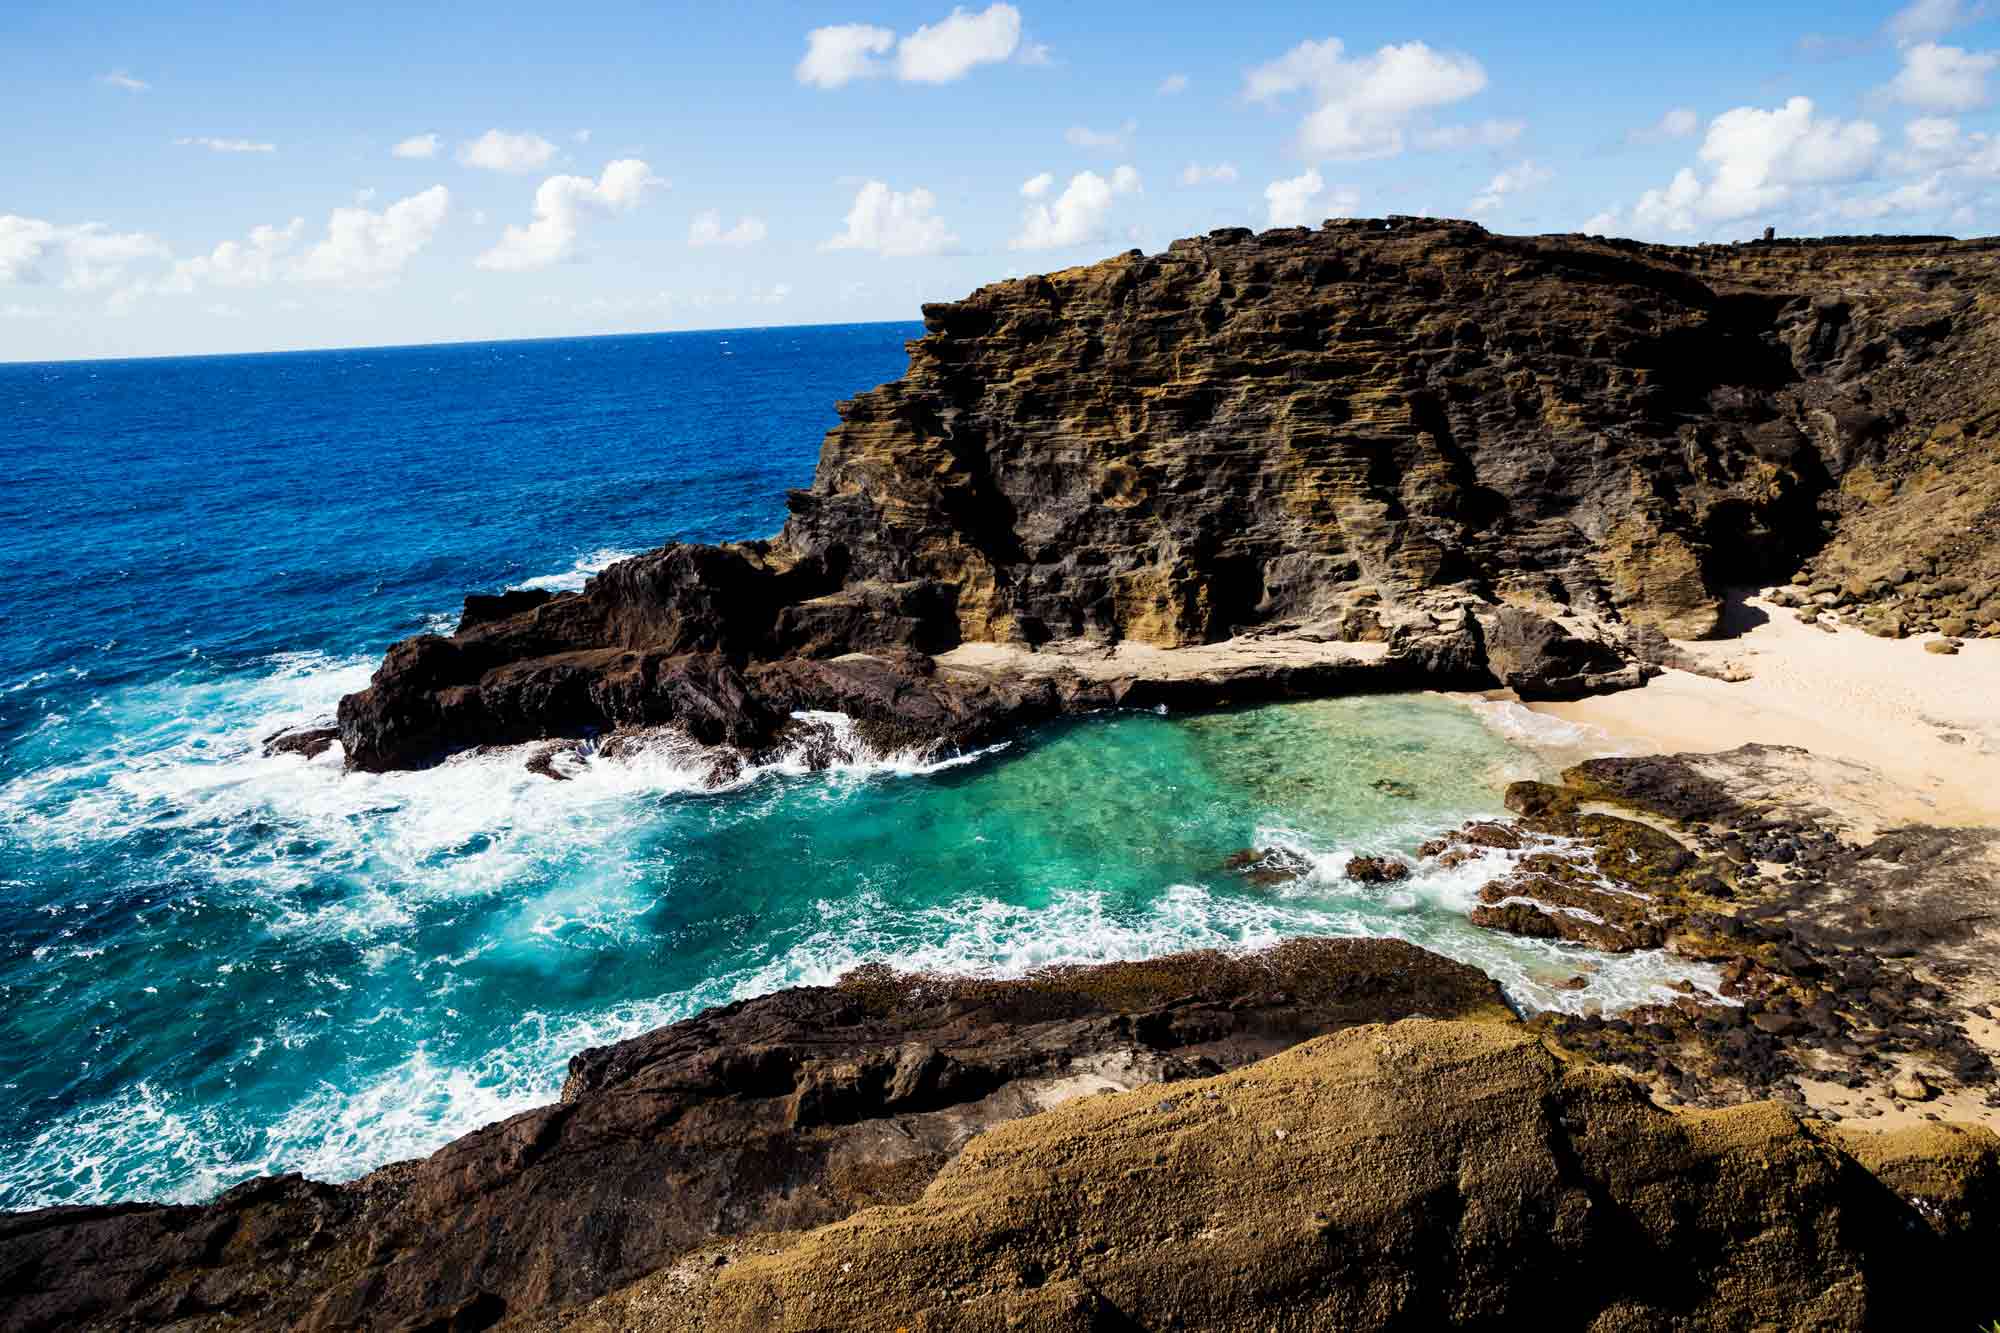 Where was Pirates of the Caribbean filmed: Oahu